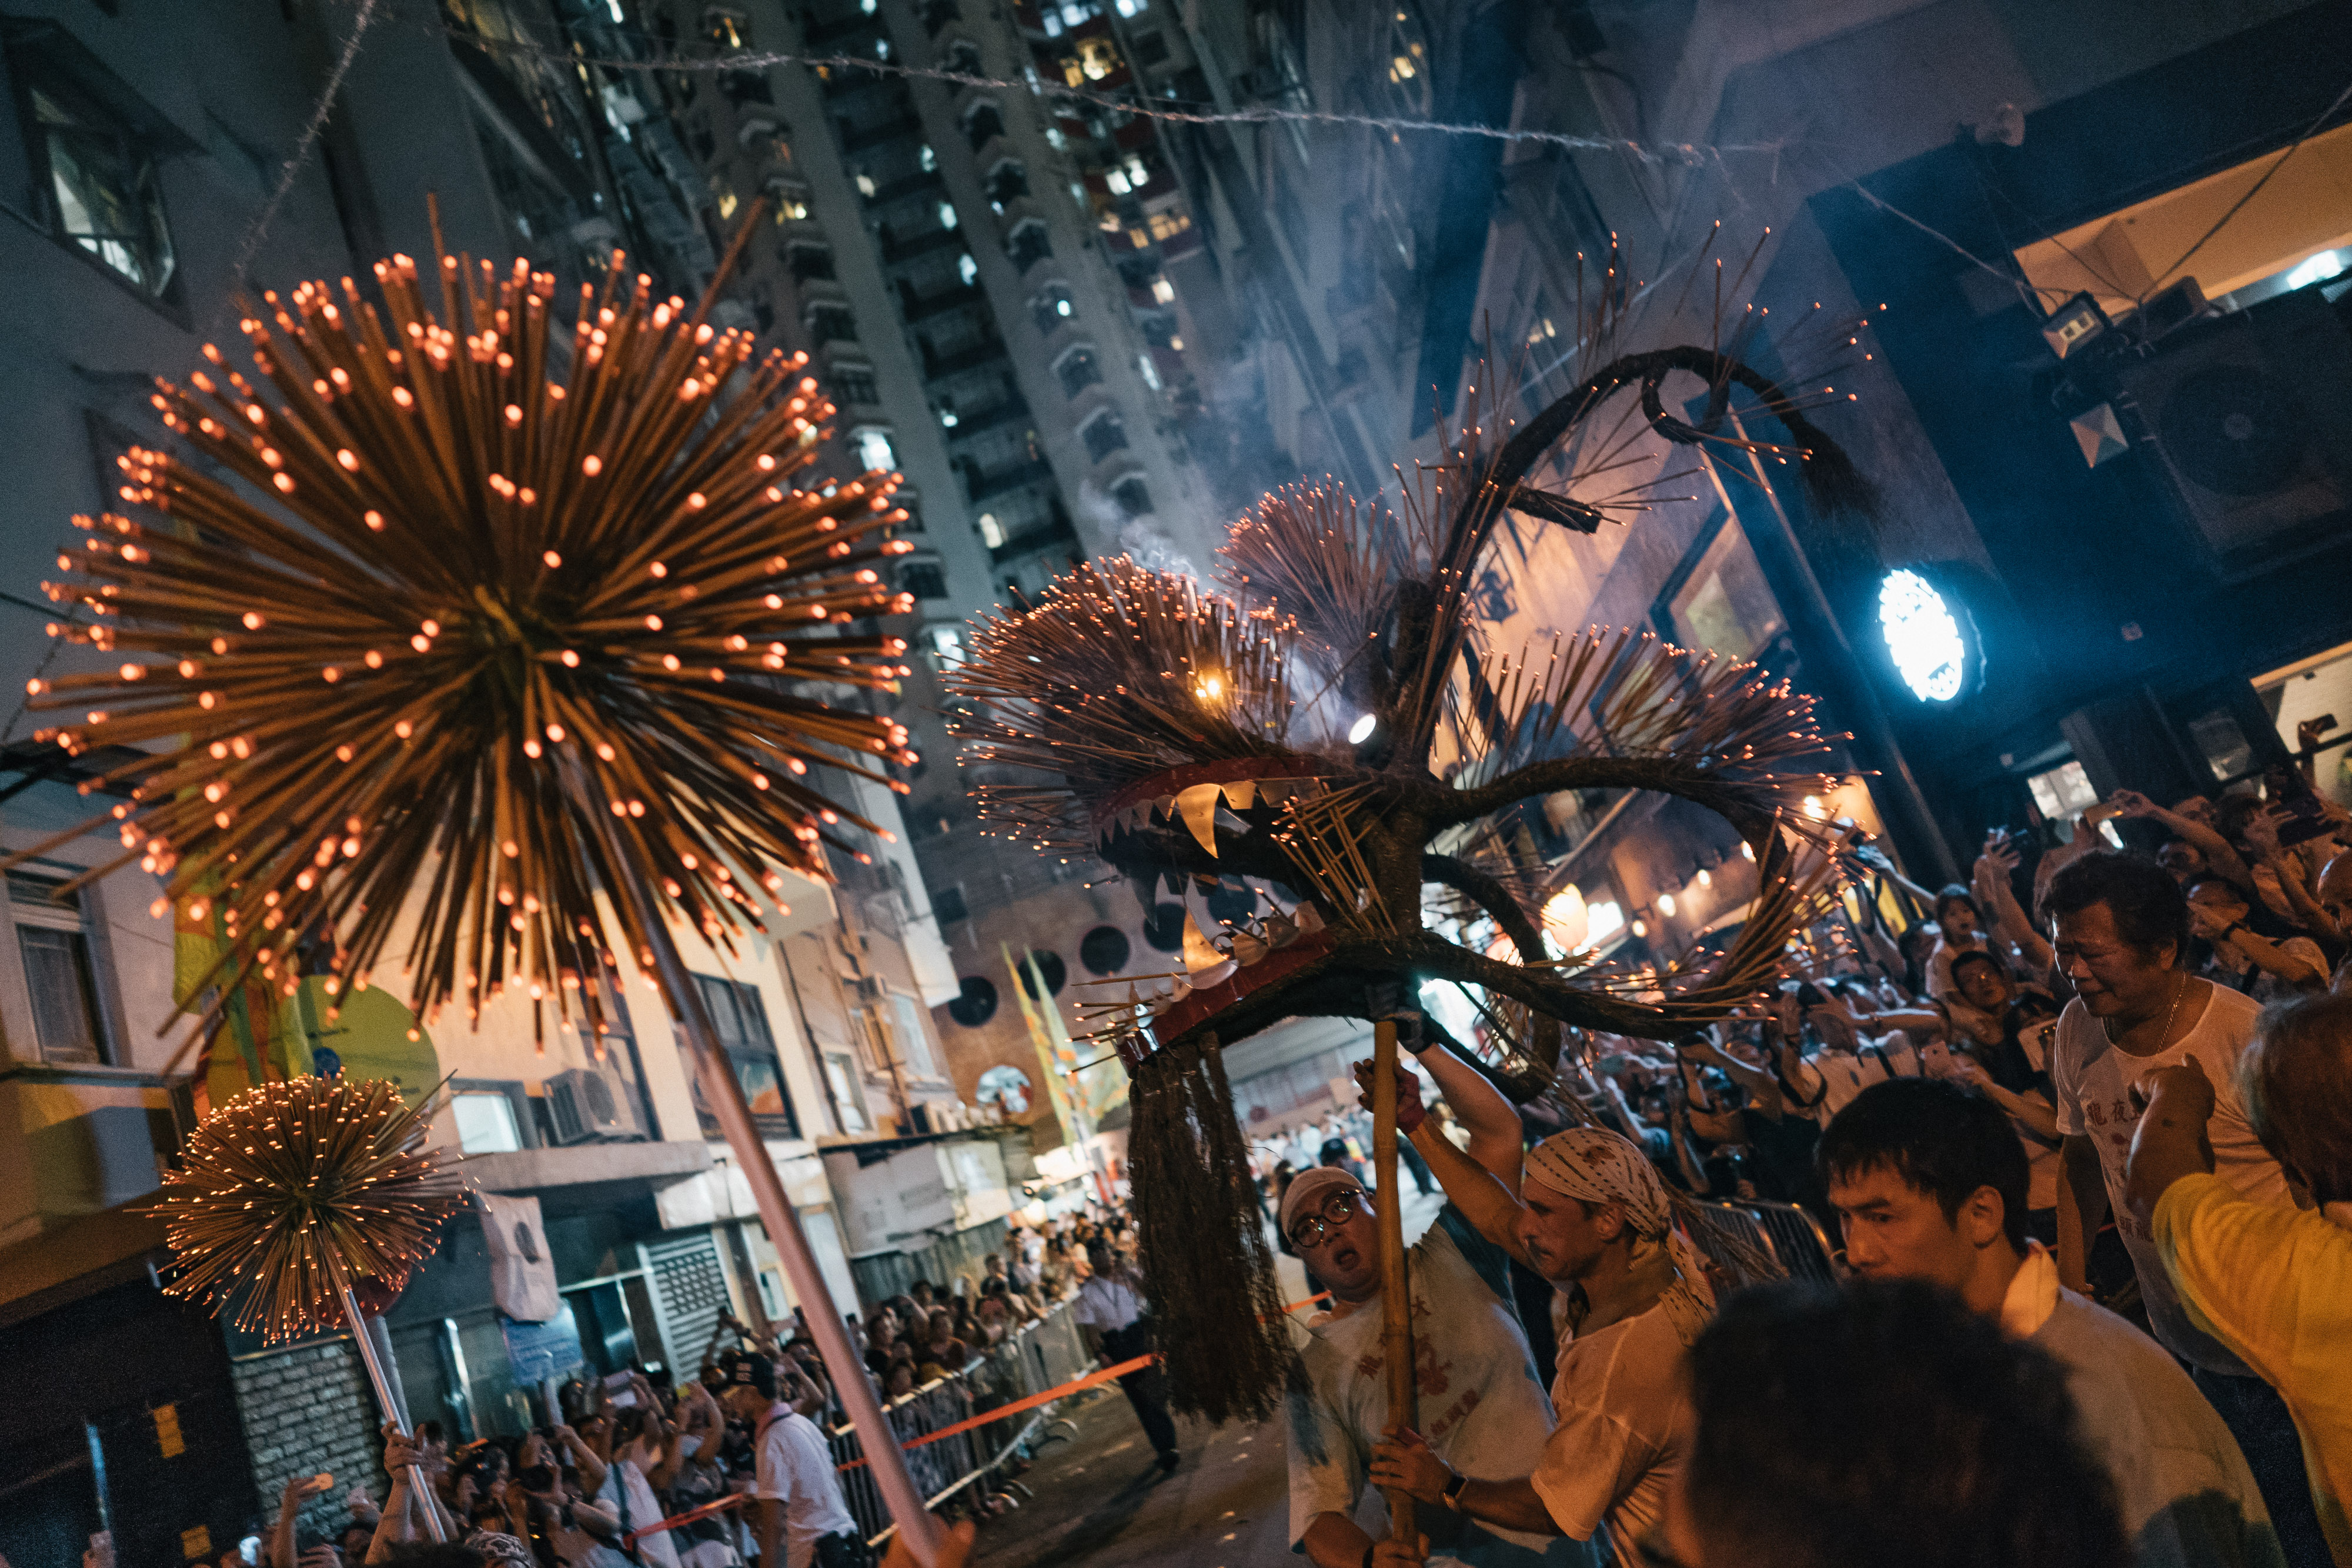 dance team performs the Fire Dragon Dance to celebrate the Mid-Autumn Festival in Hong Kong on Sept. 23, 2018. (Anthony Kwan—Hong Kong Tourism Board/Getty Images A)